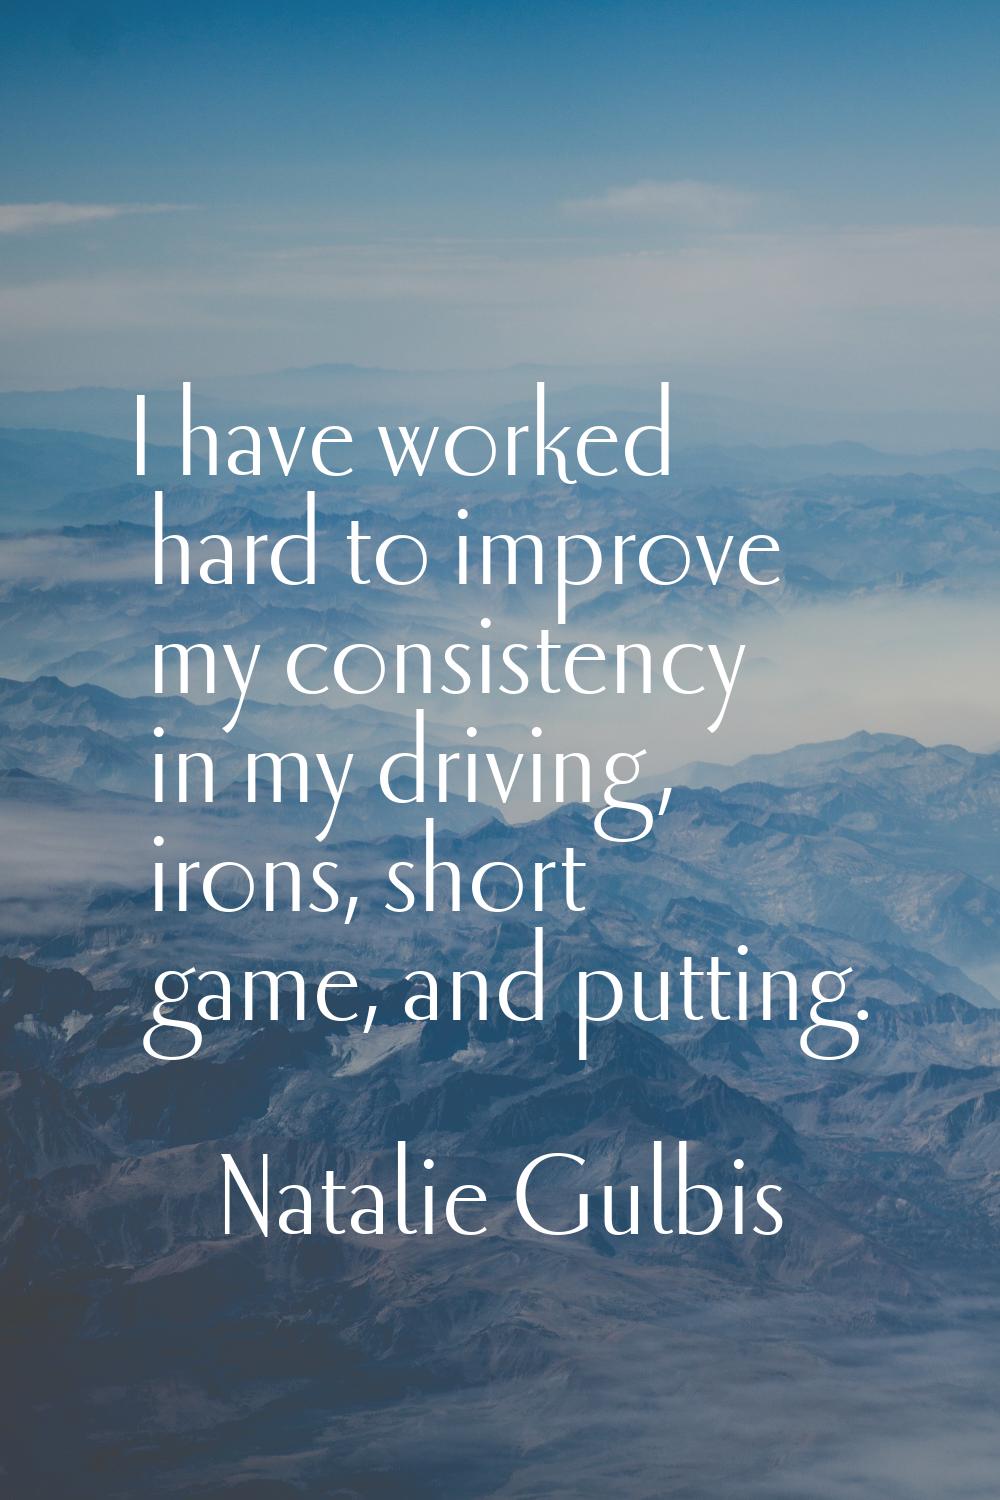 I have worked hard to improve my consistency in my driving, irons, short game, and putting.